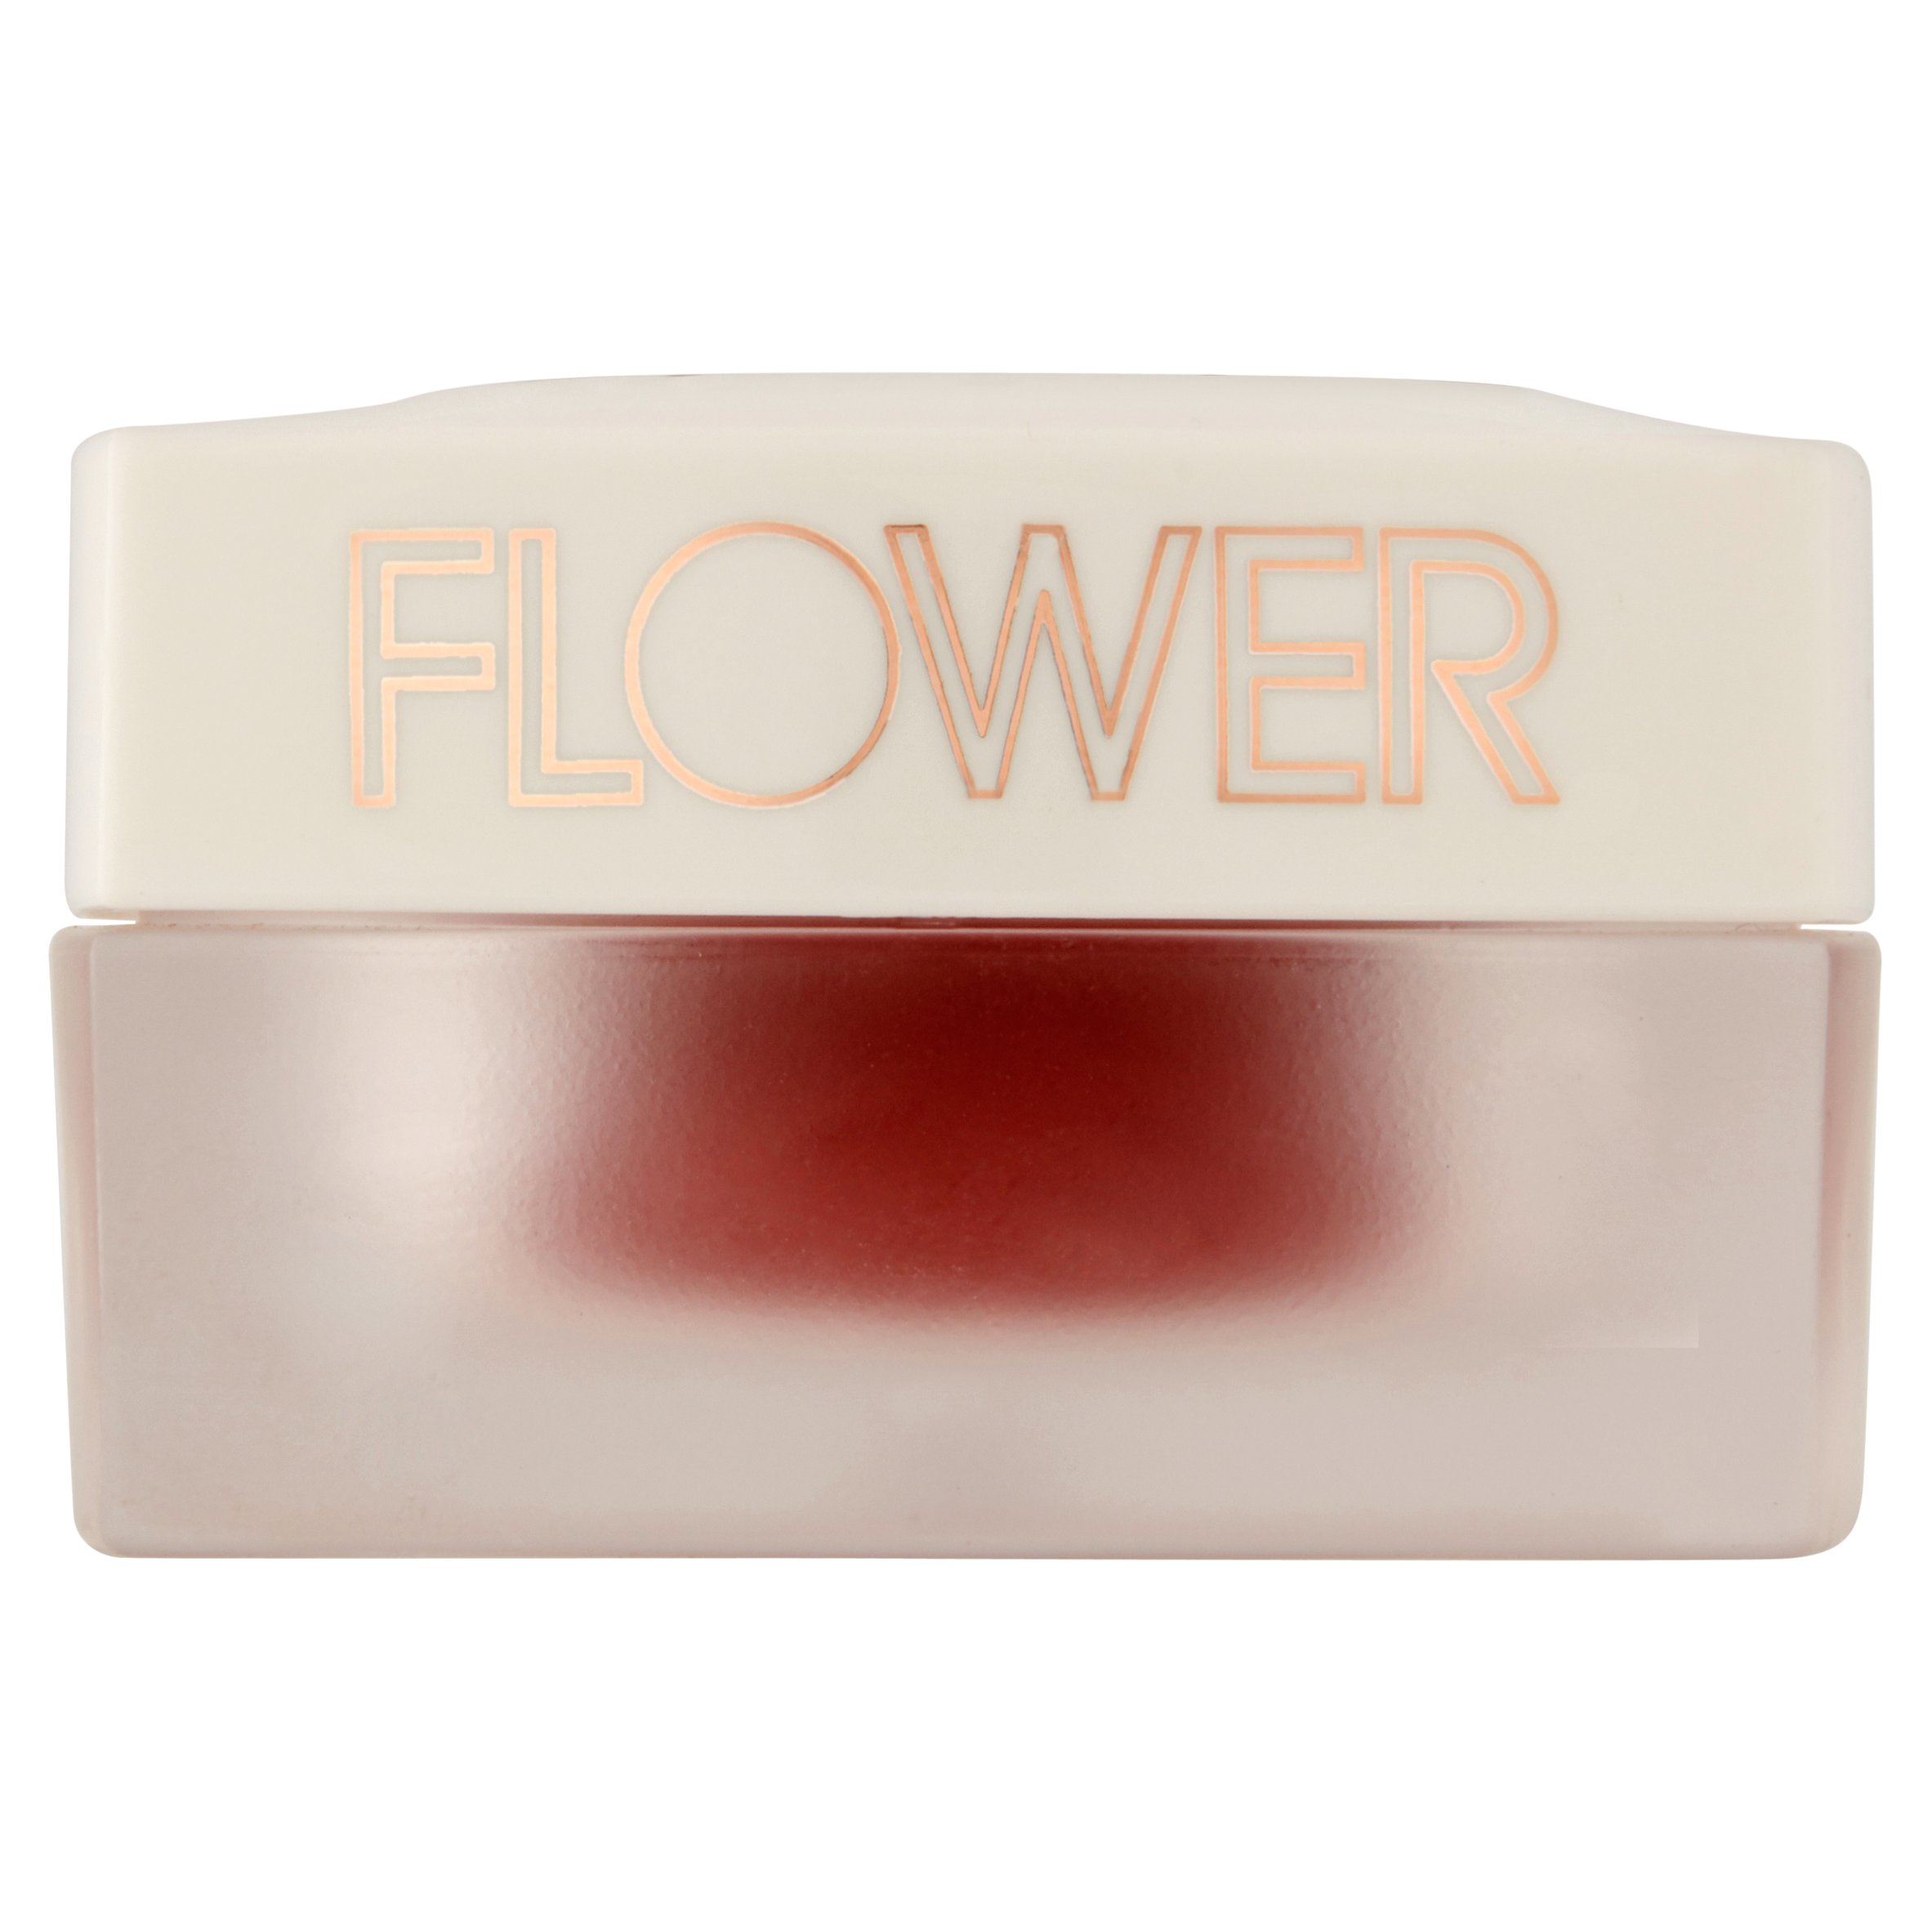 Flower TT1 A-Coral-Ble Transforming Touch Powder-to-creme Blush, 0.20 oz - image 1 of 2